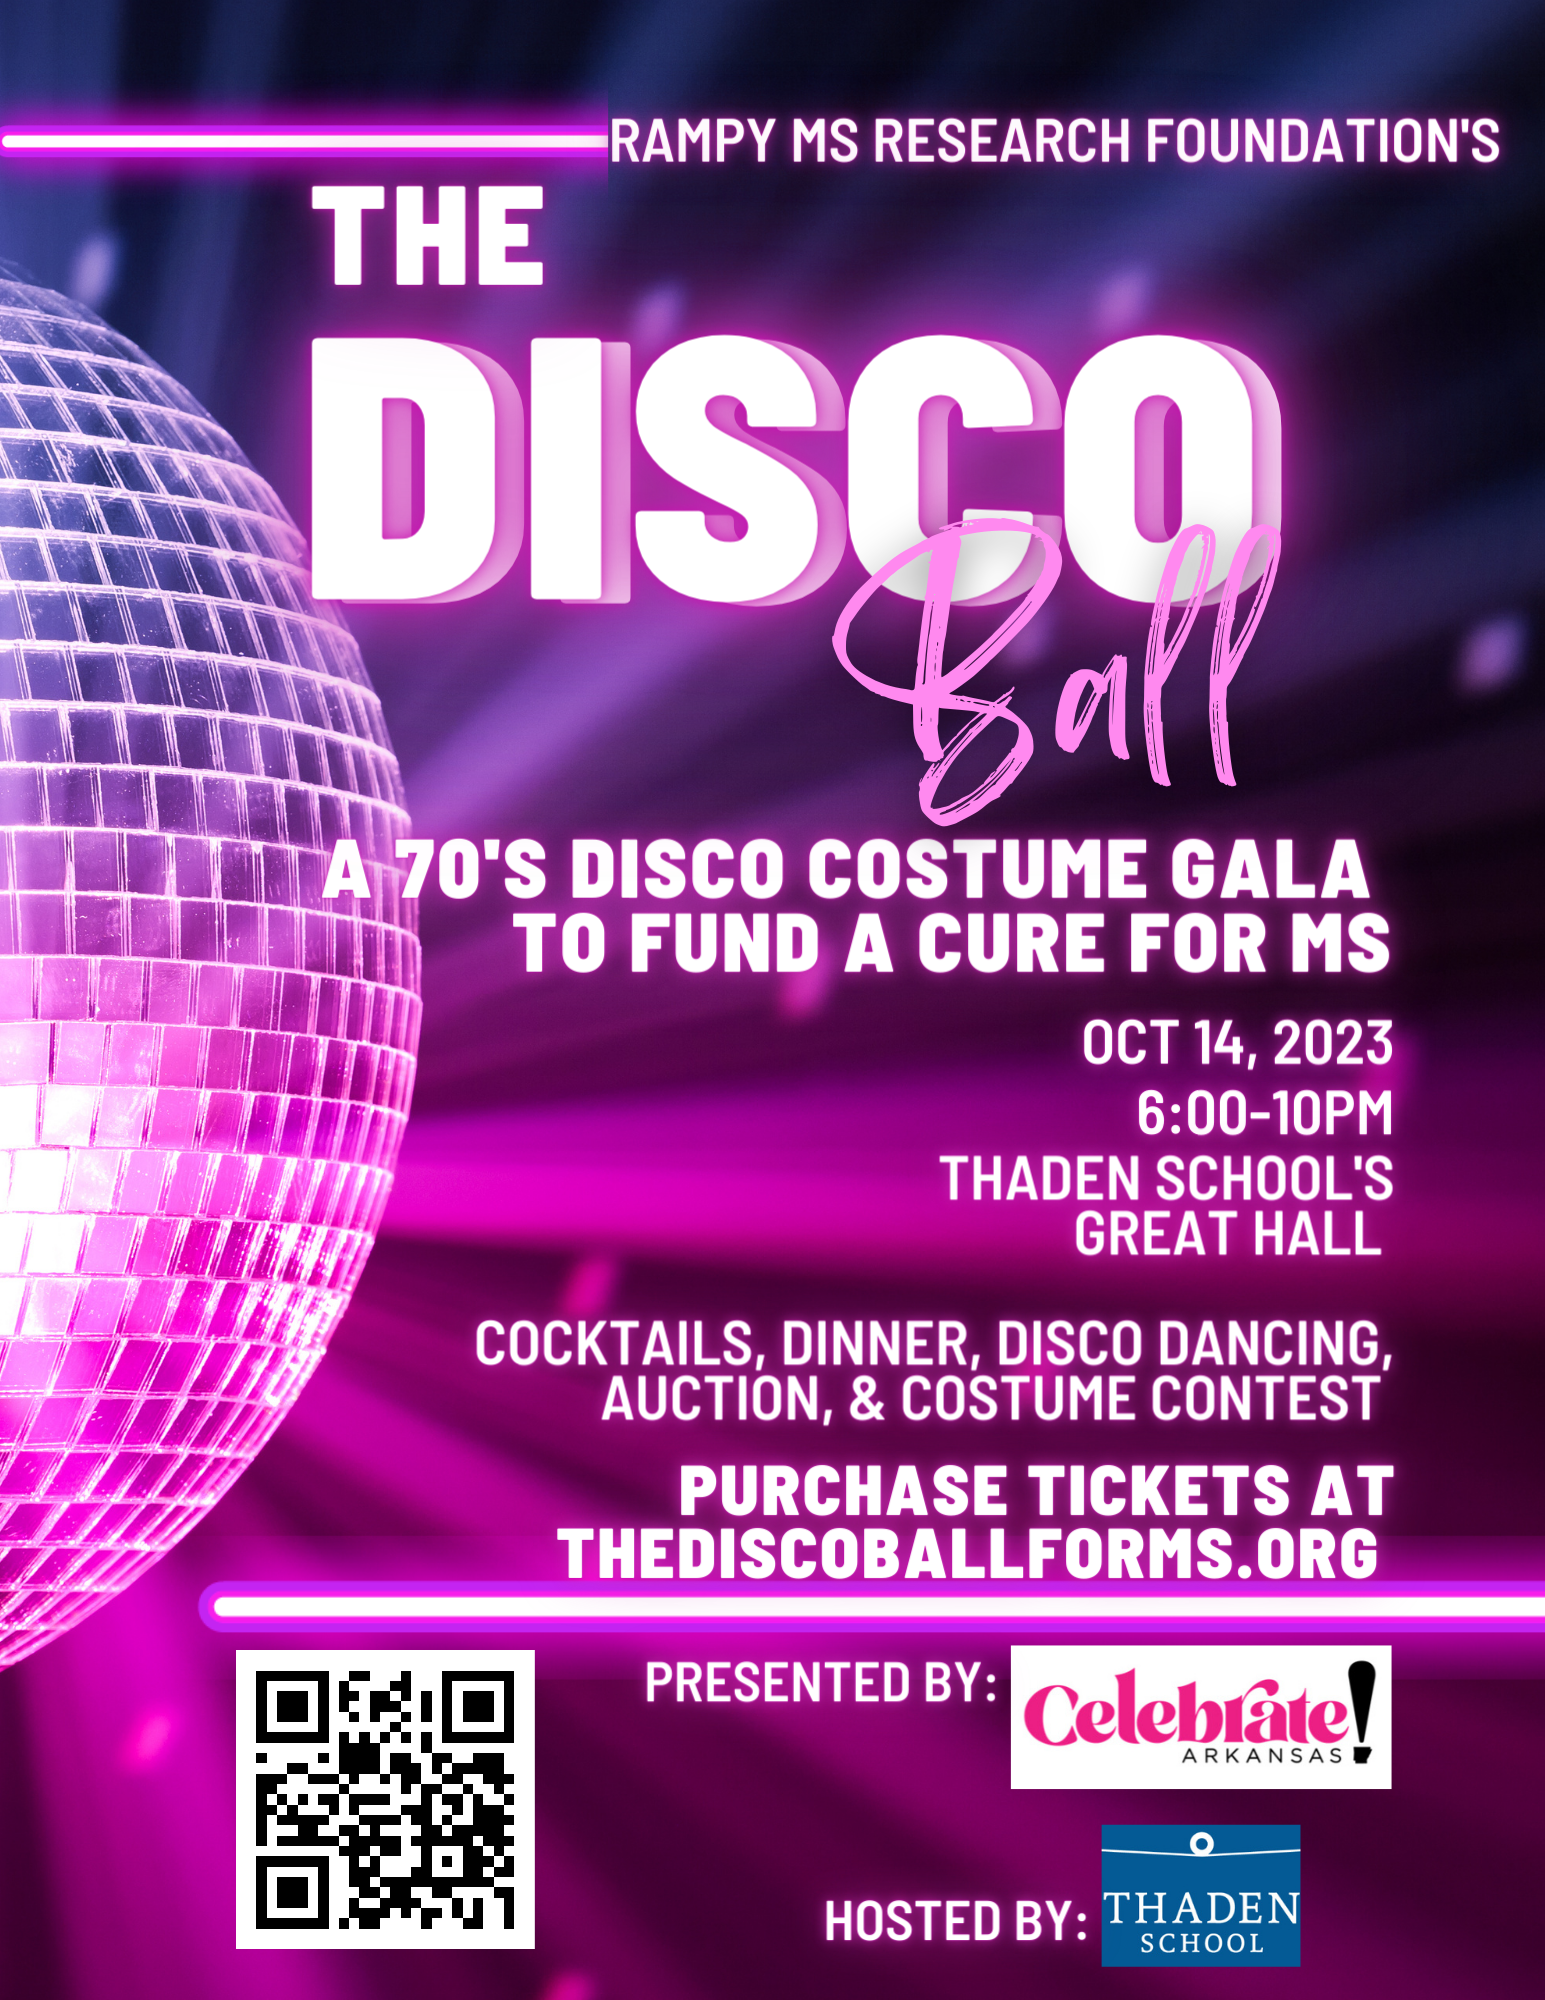 Disco Ball for MS: A Groovy Costume Gala to Fund a Cure for MS